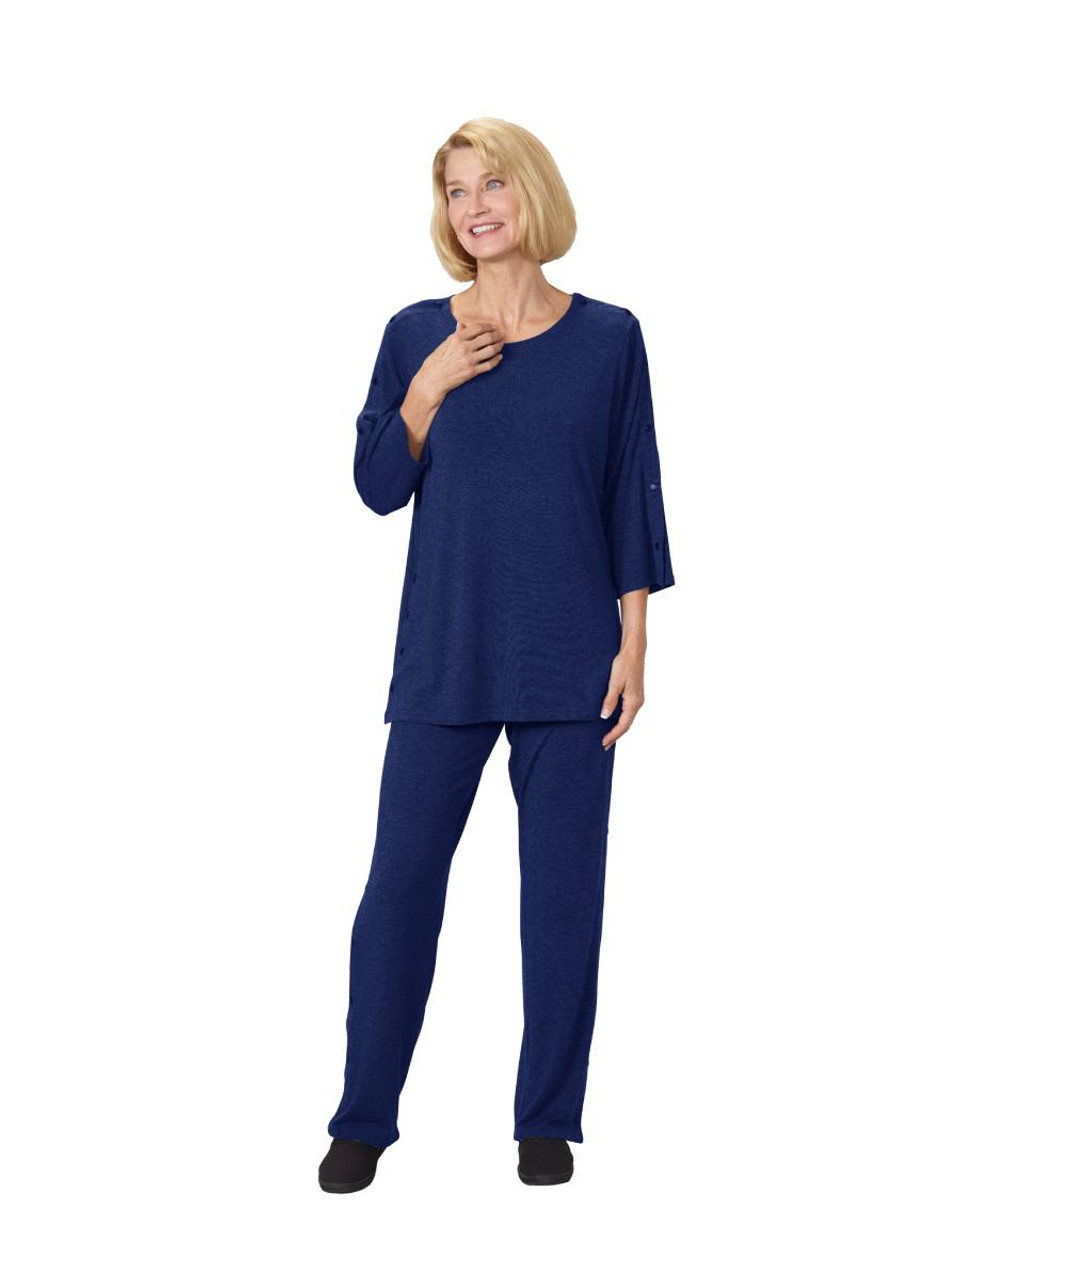 Silverts SV61000 Womens Post-Surgical Top With Snaps Navy, Size=XL, SV61000-SV3-XL